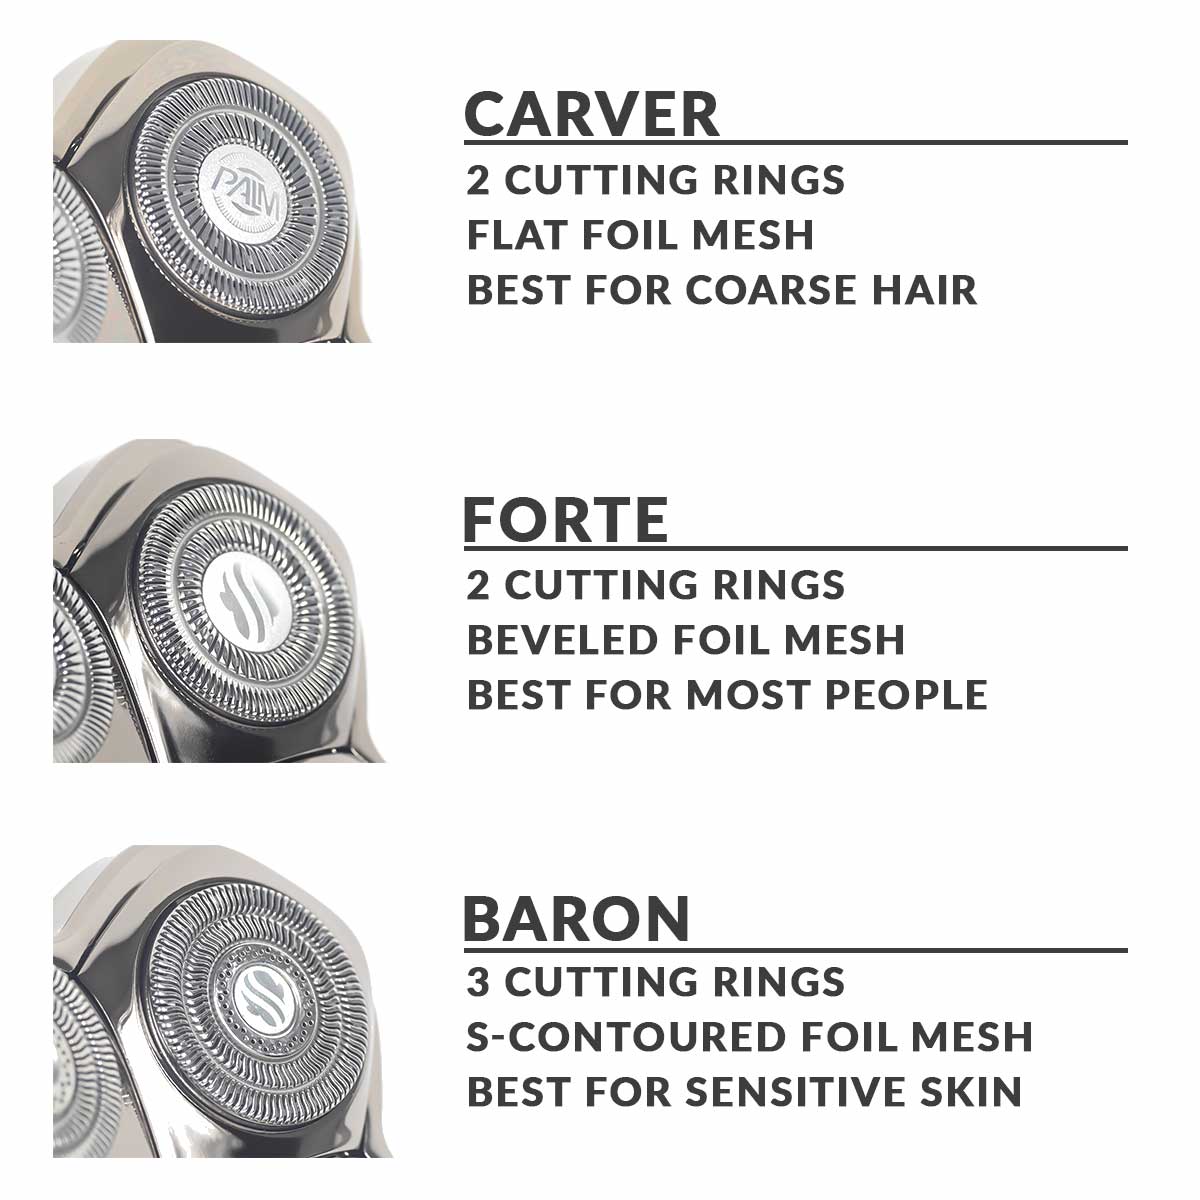 Carver PRO 4 Head Replacement Blade for Pitbull, Palm, and Butterfly Kiss Shavers